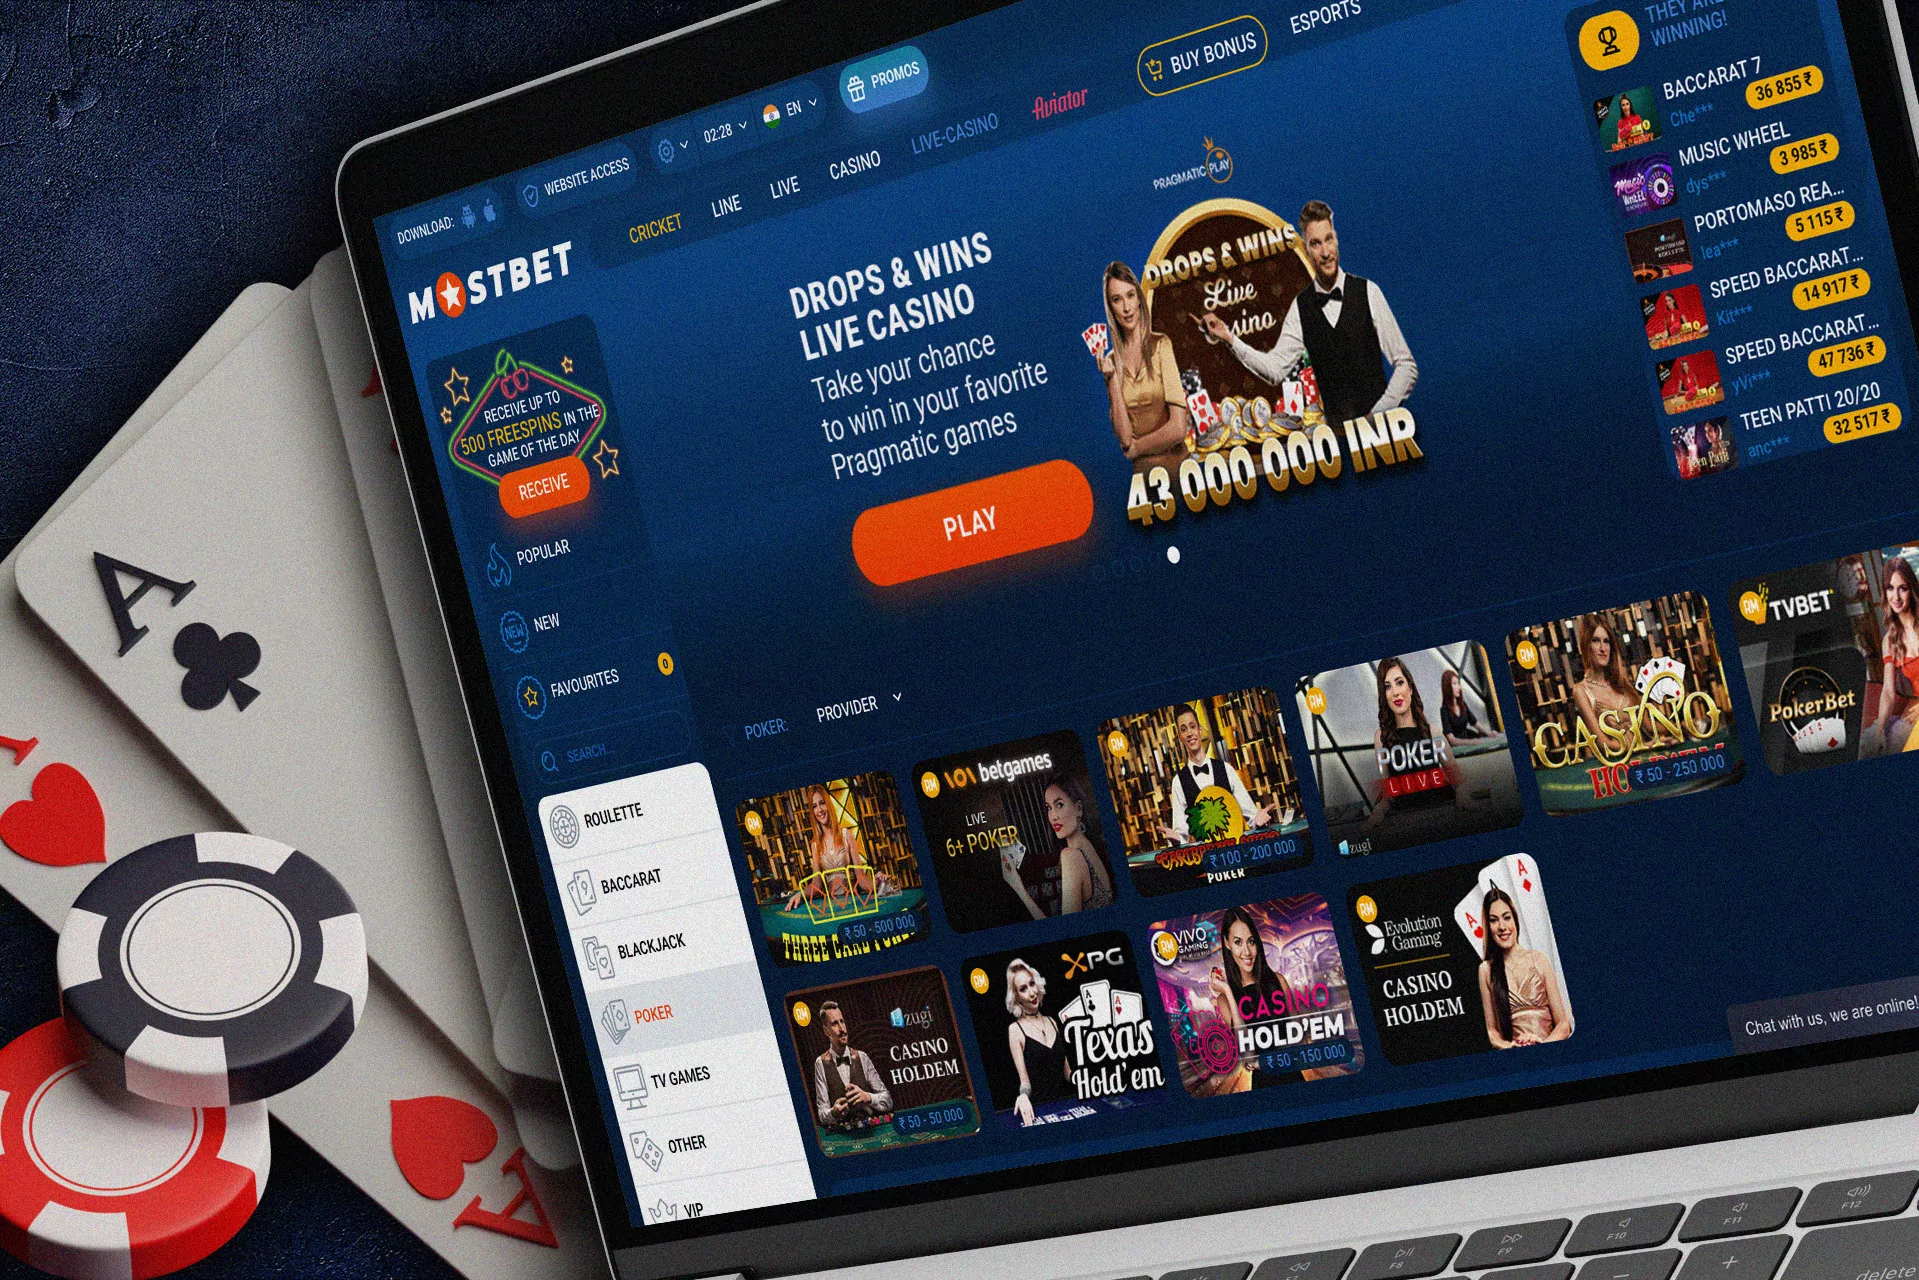 There are Txas Holdem and Omaha to play at Mostbet.